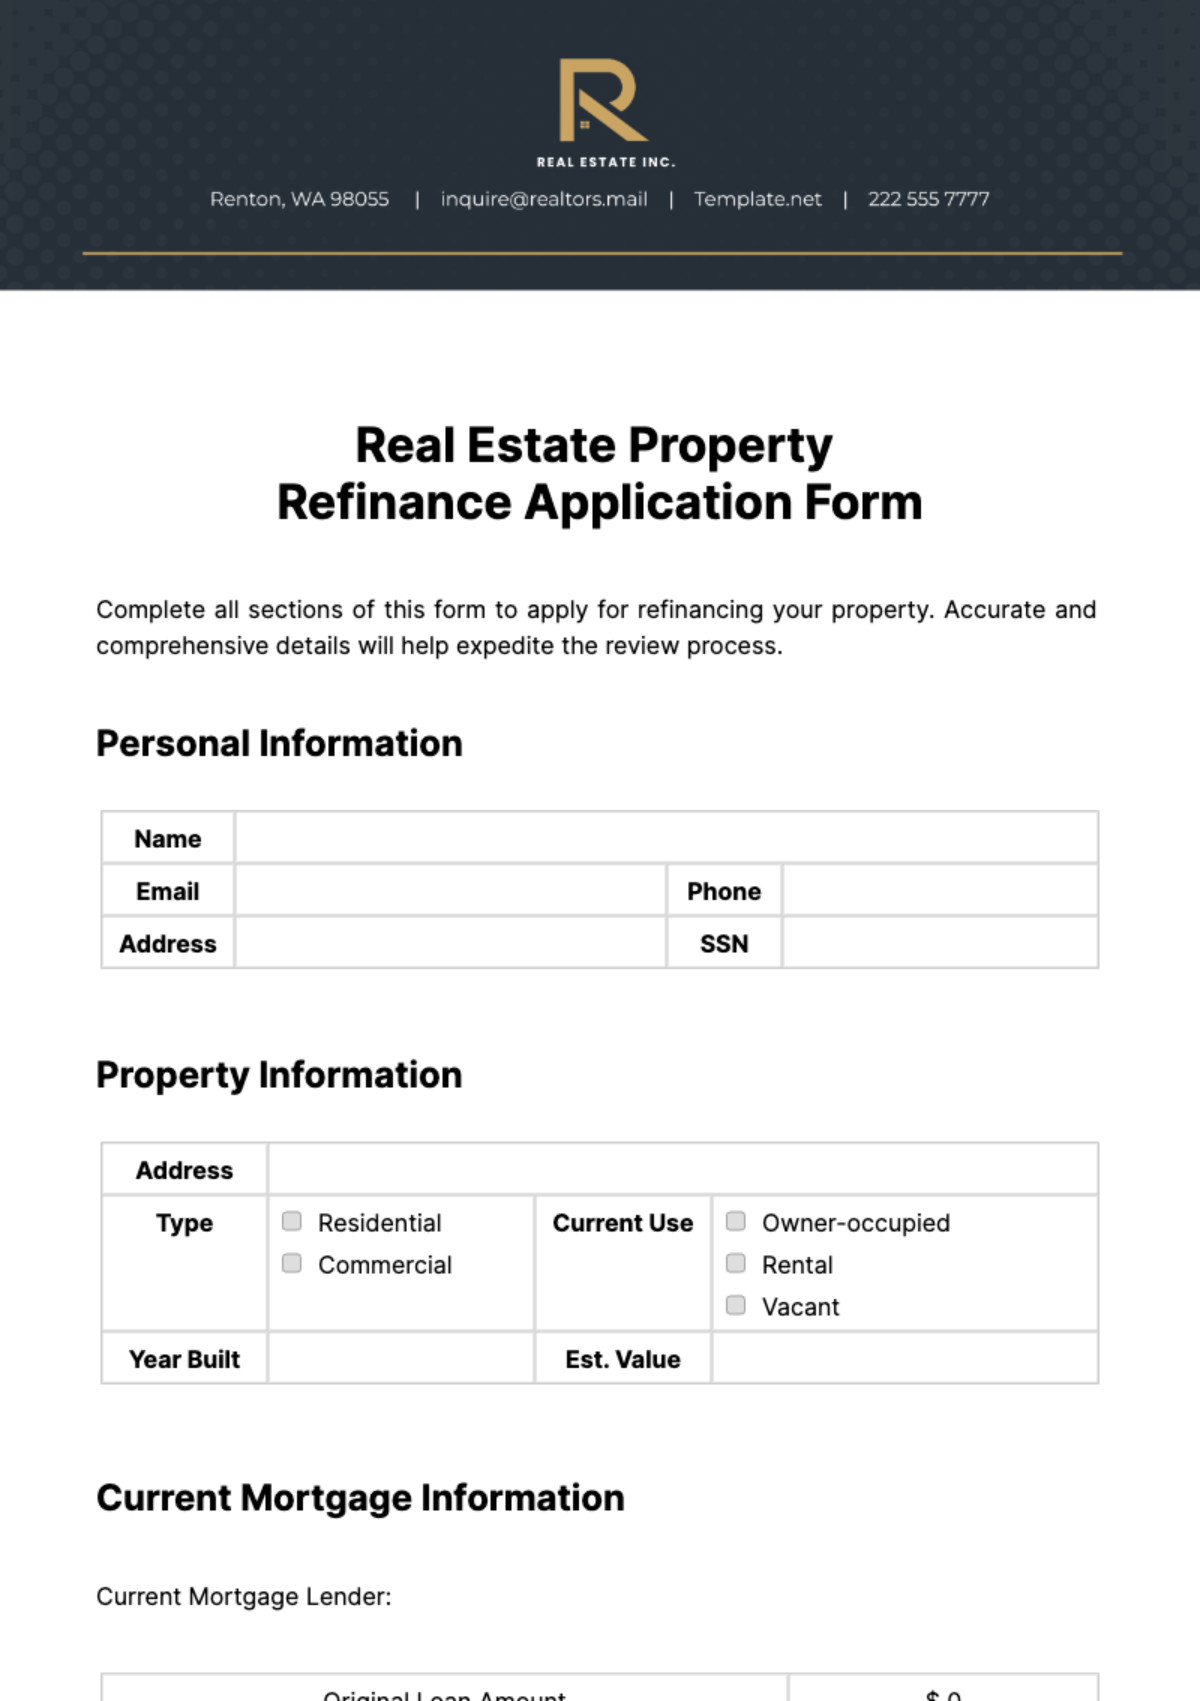 Real Estate Property Refinance Application Form Template